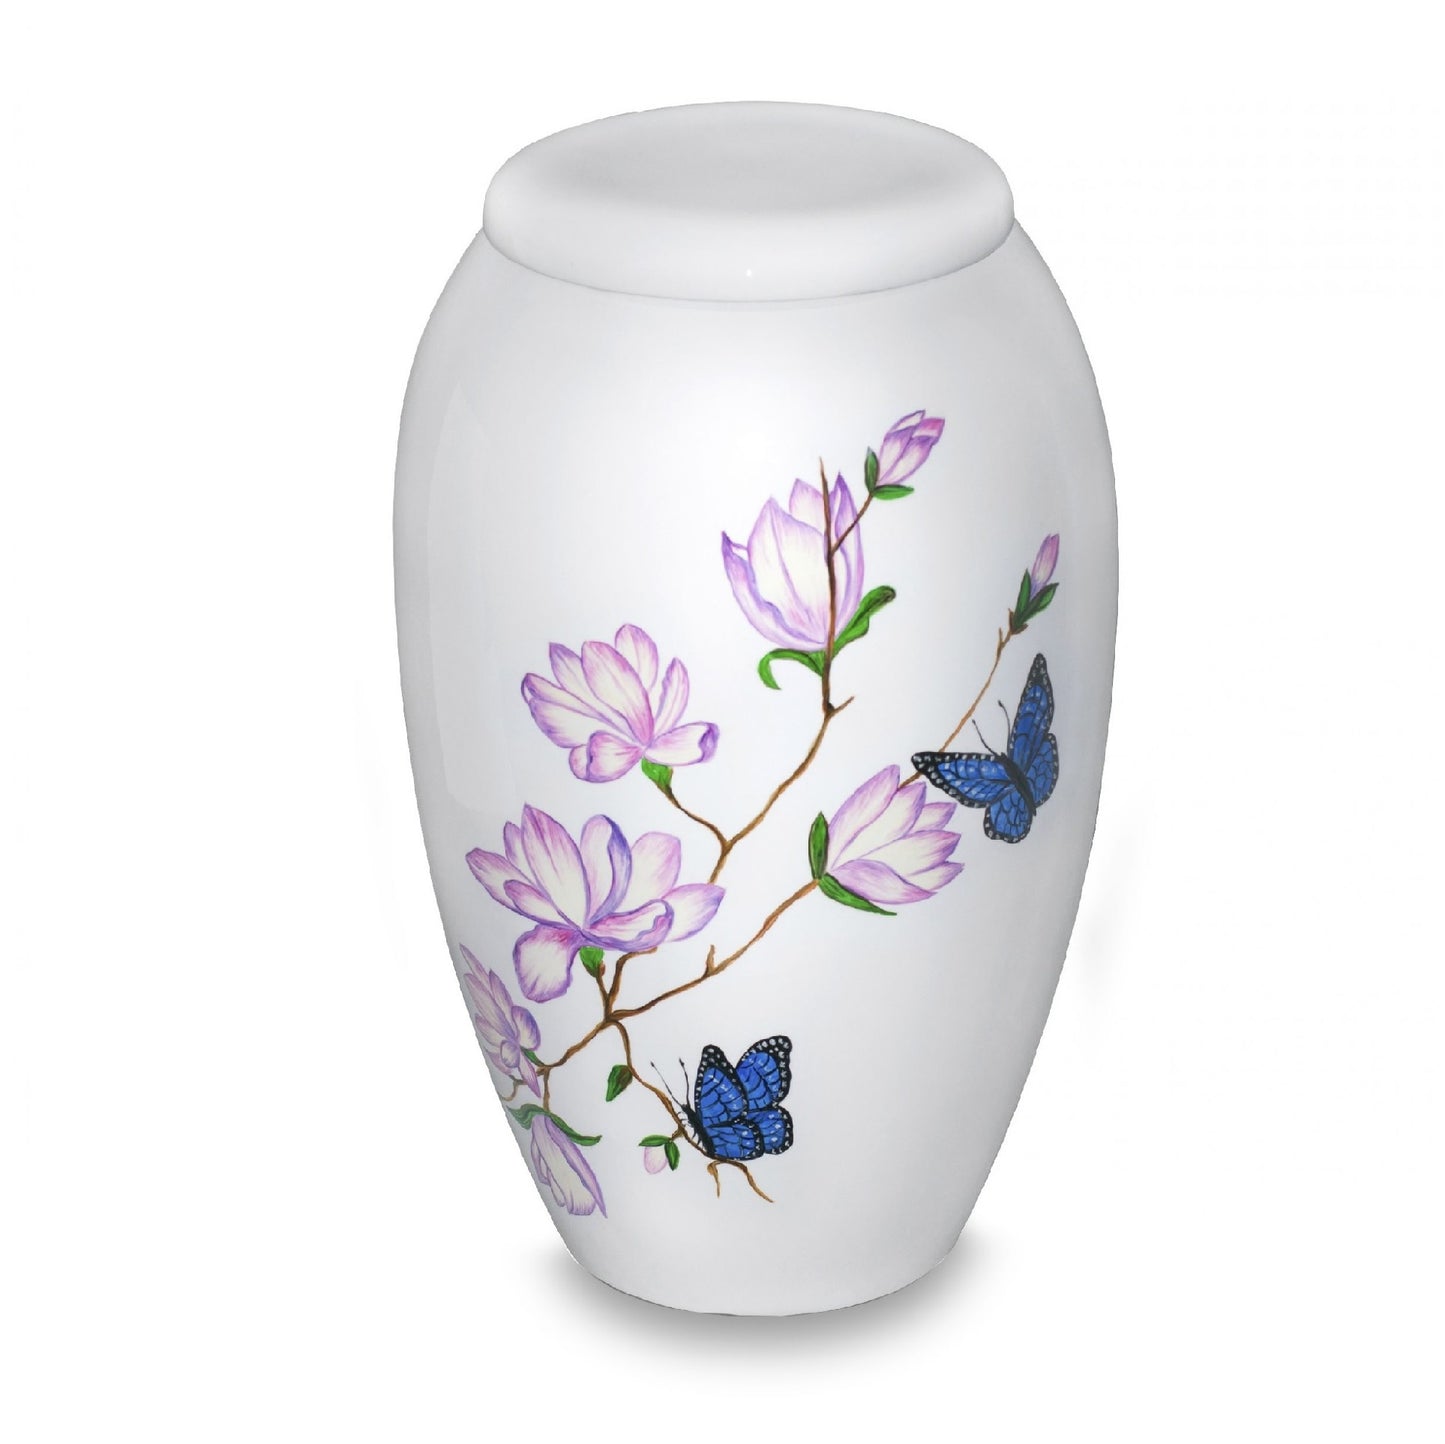 White Urn with Blue butterflies with Lavender Flowers.